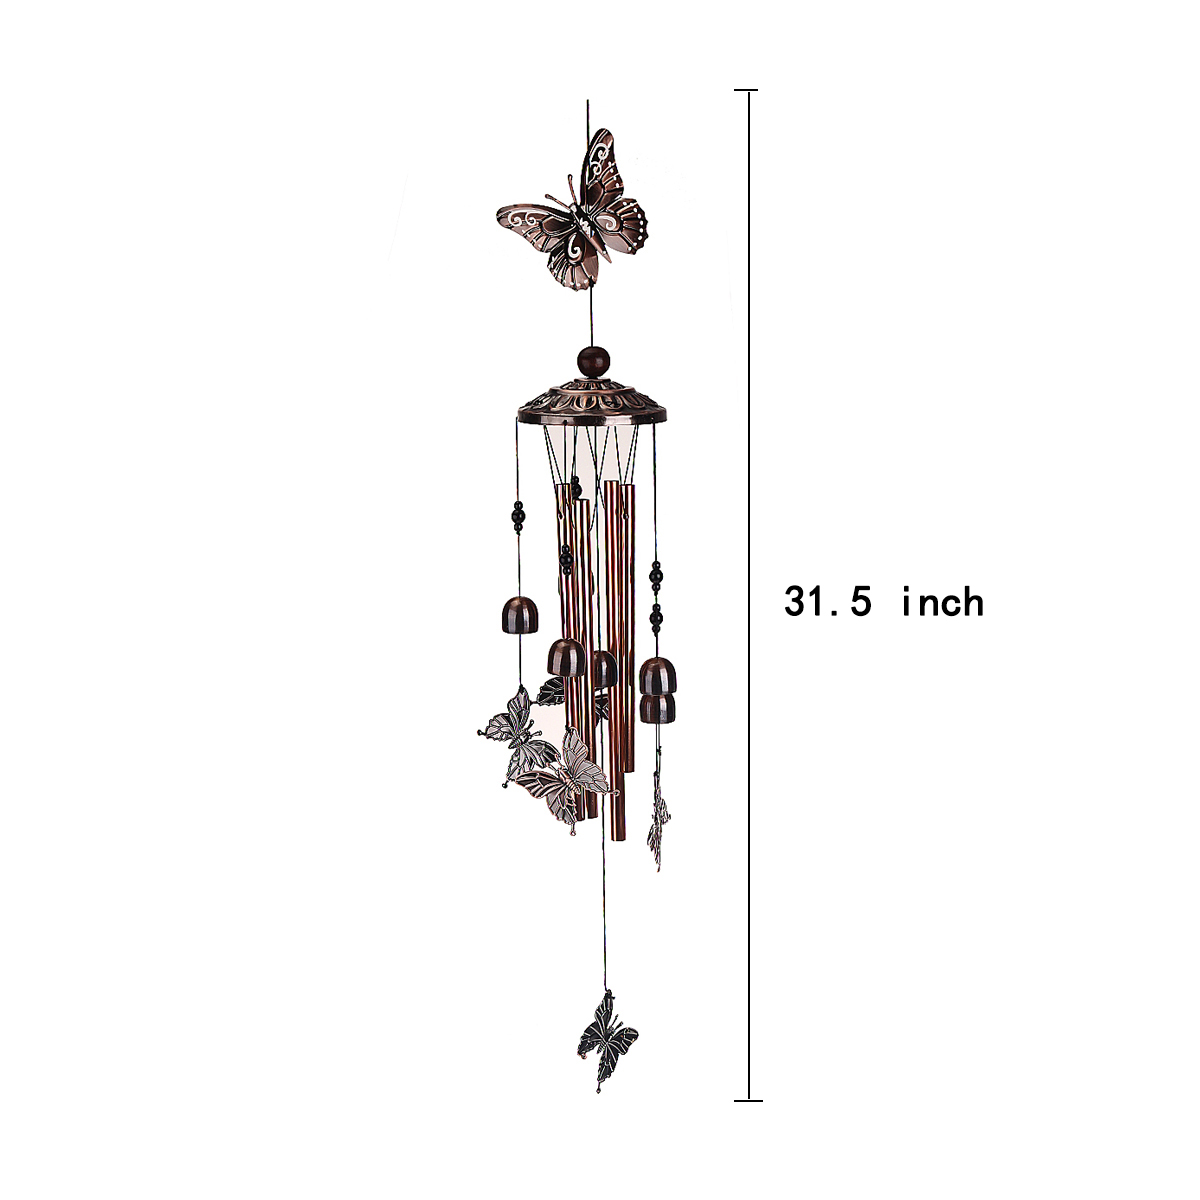 Brass-Bell-Wind-Chime-Ornaments-European-And-American-Garden-Home-Decoration-1777951-6